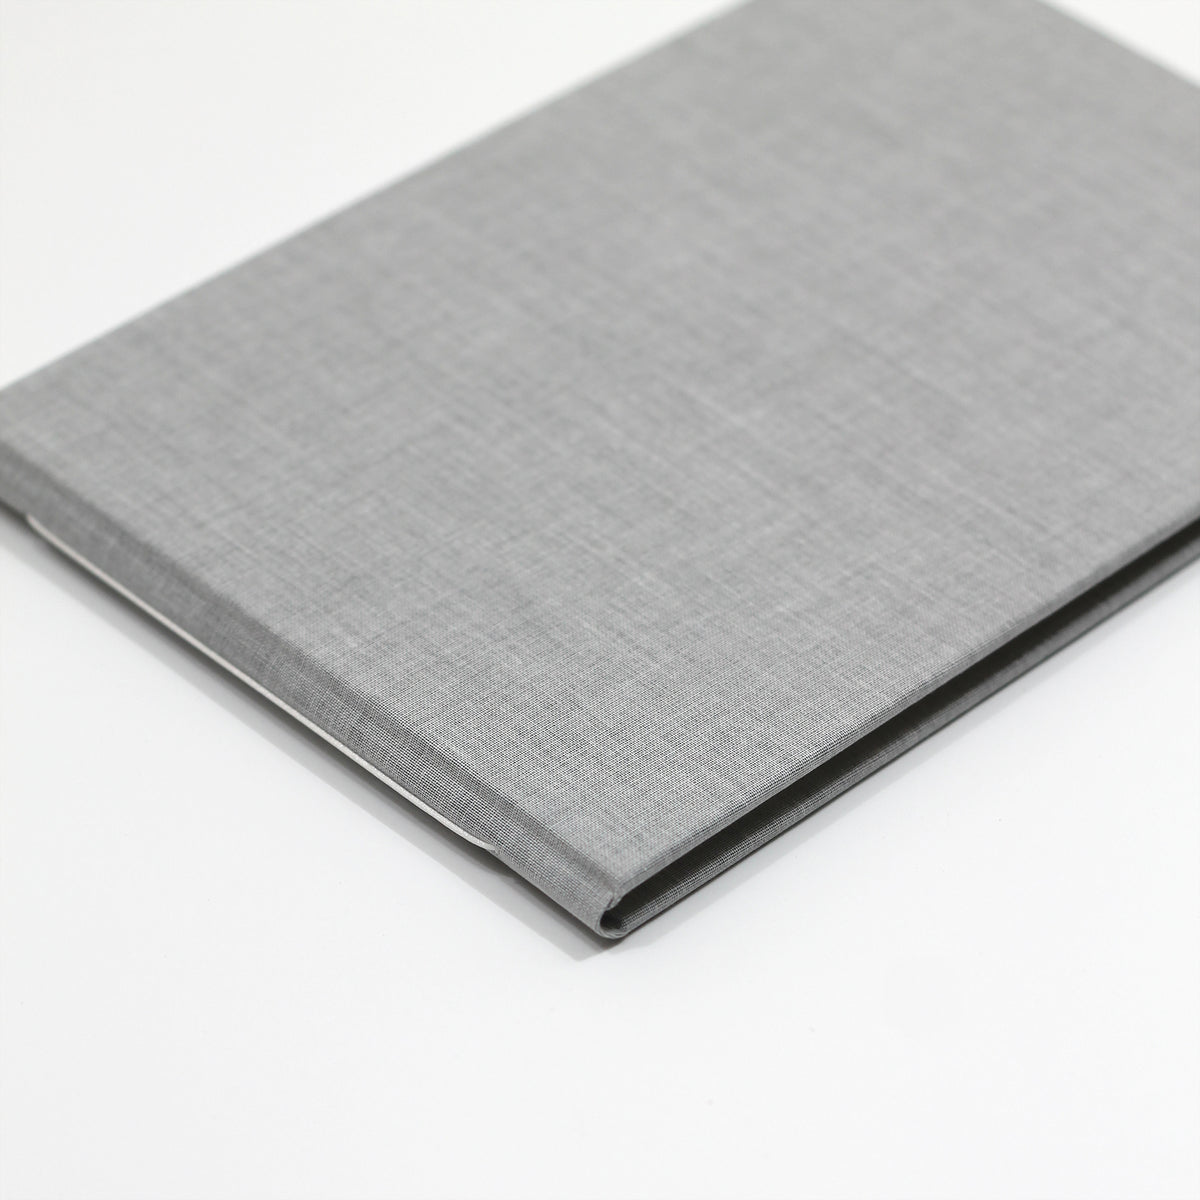 Guestbook | Cover: Dove Gray Linen | Available Personalized